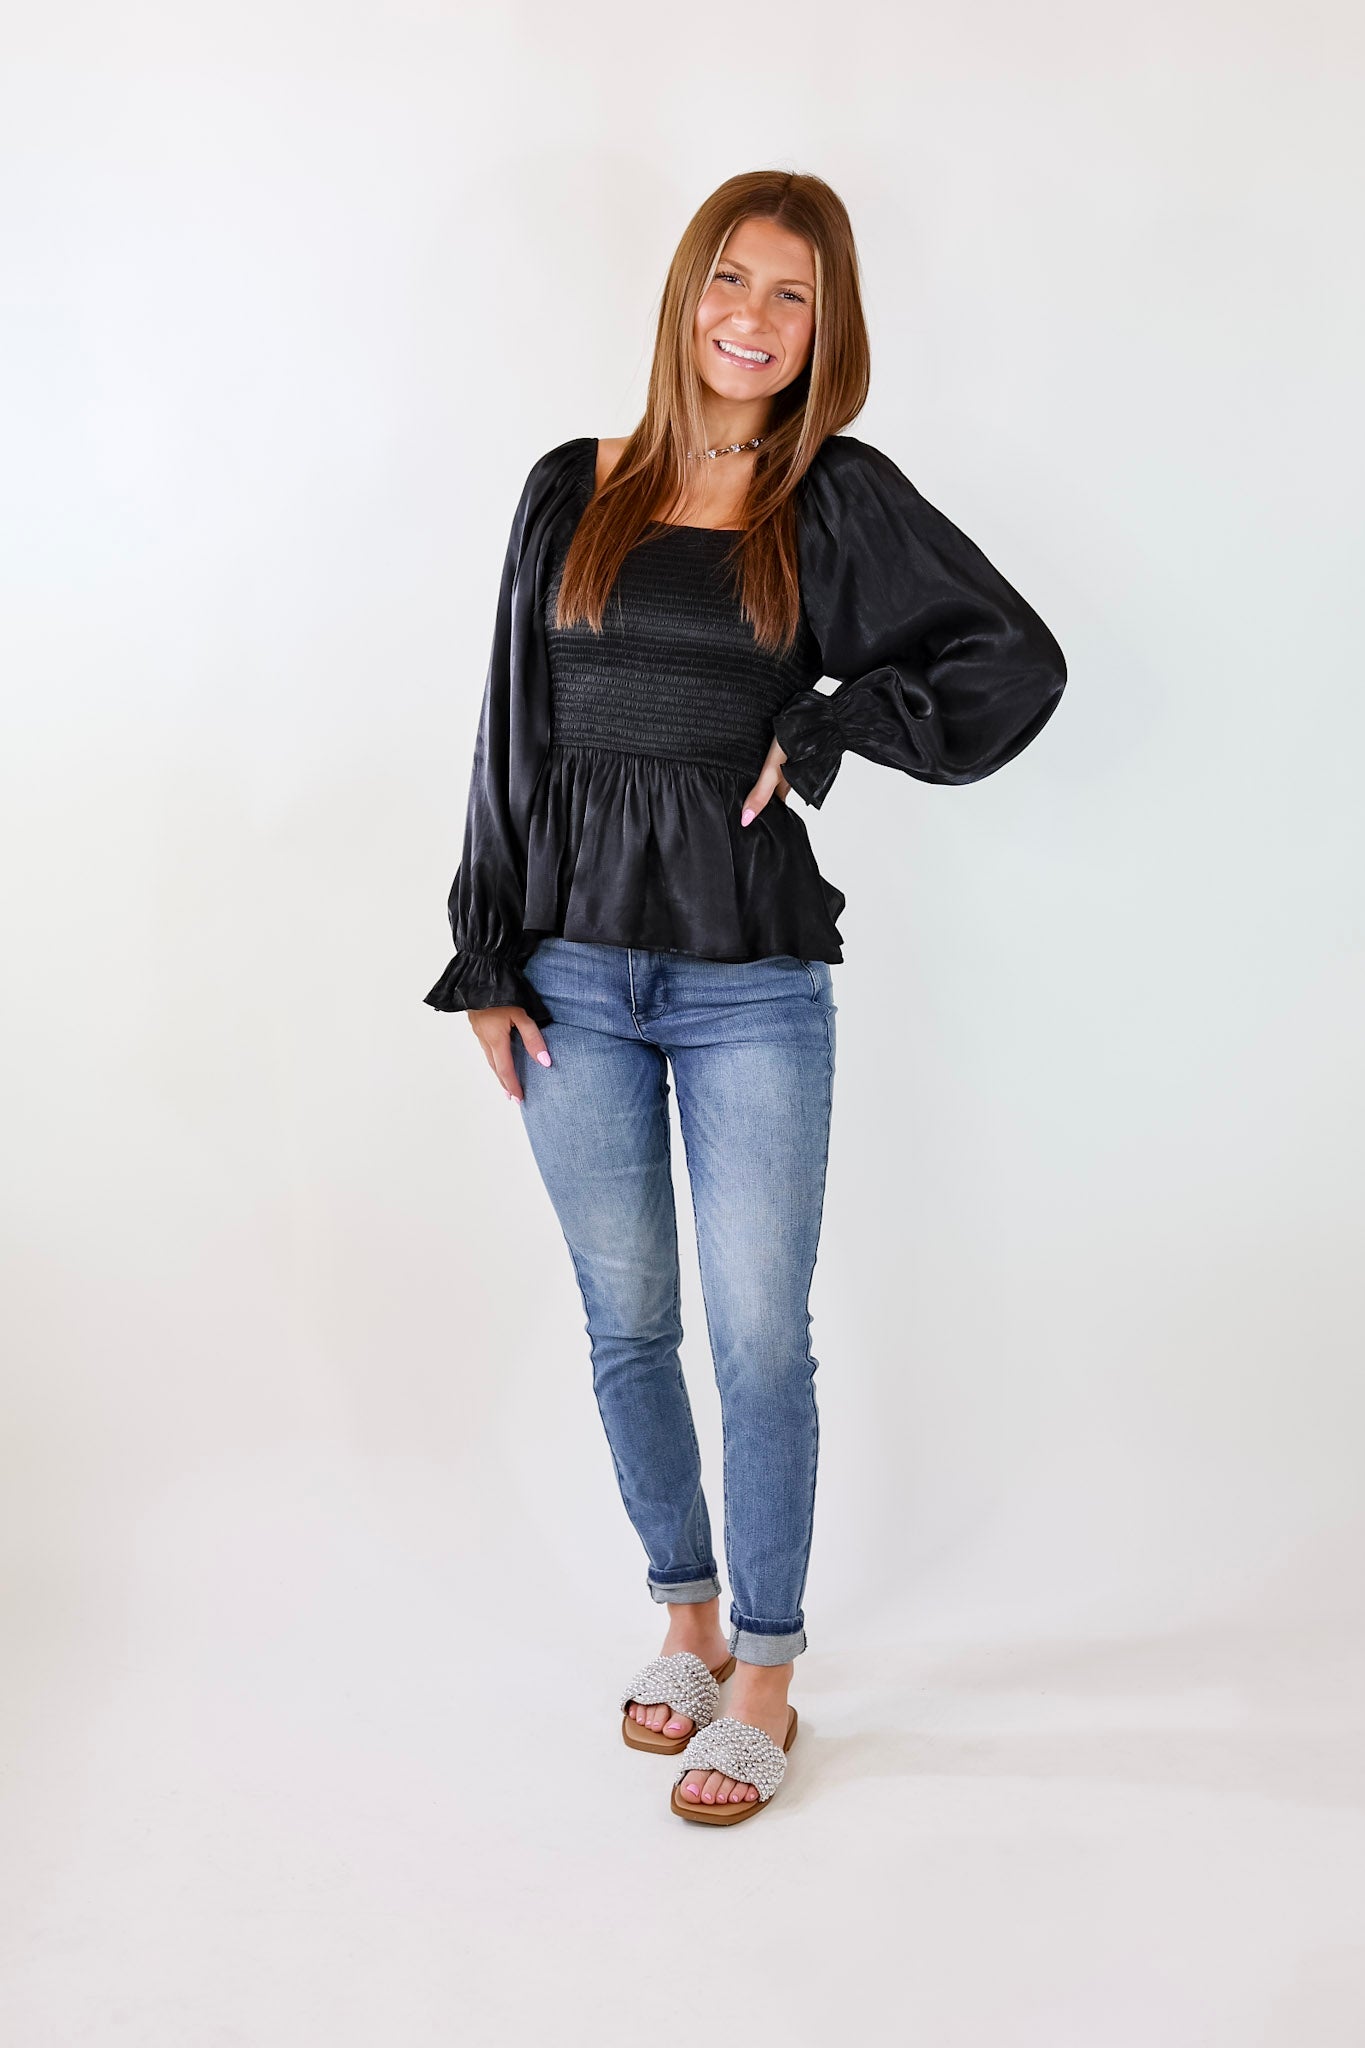 Perfect Vision Smocked Long Sleeve Top in Black - Giddy Up Glamour Boutique